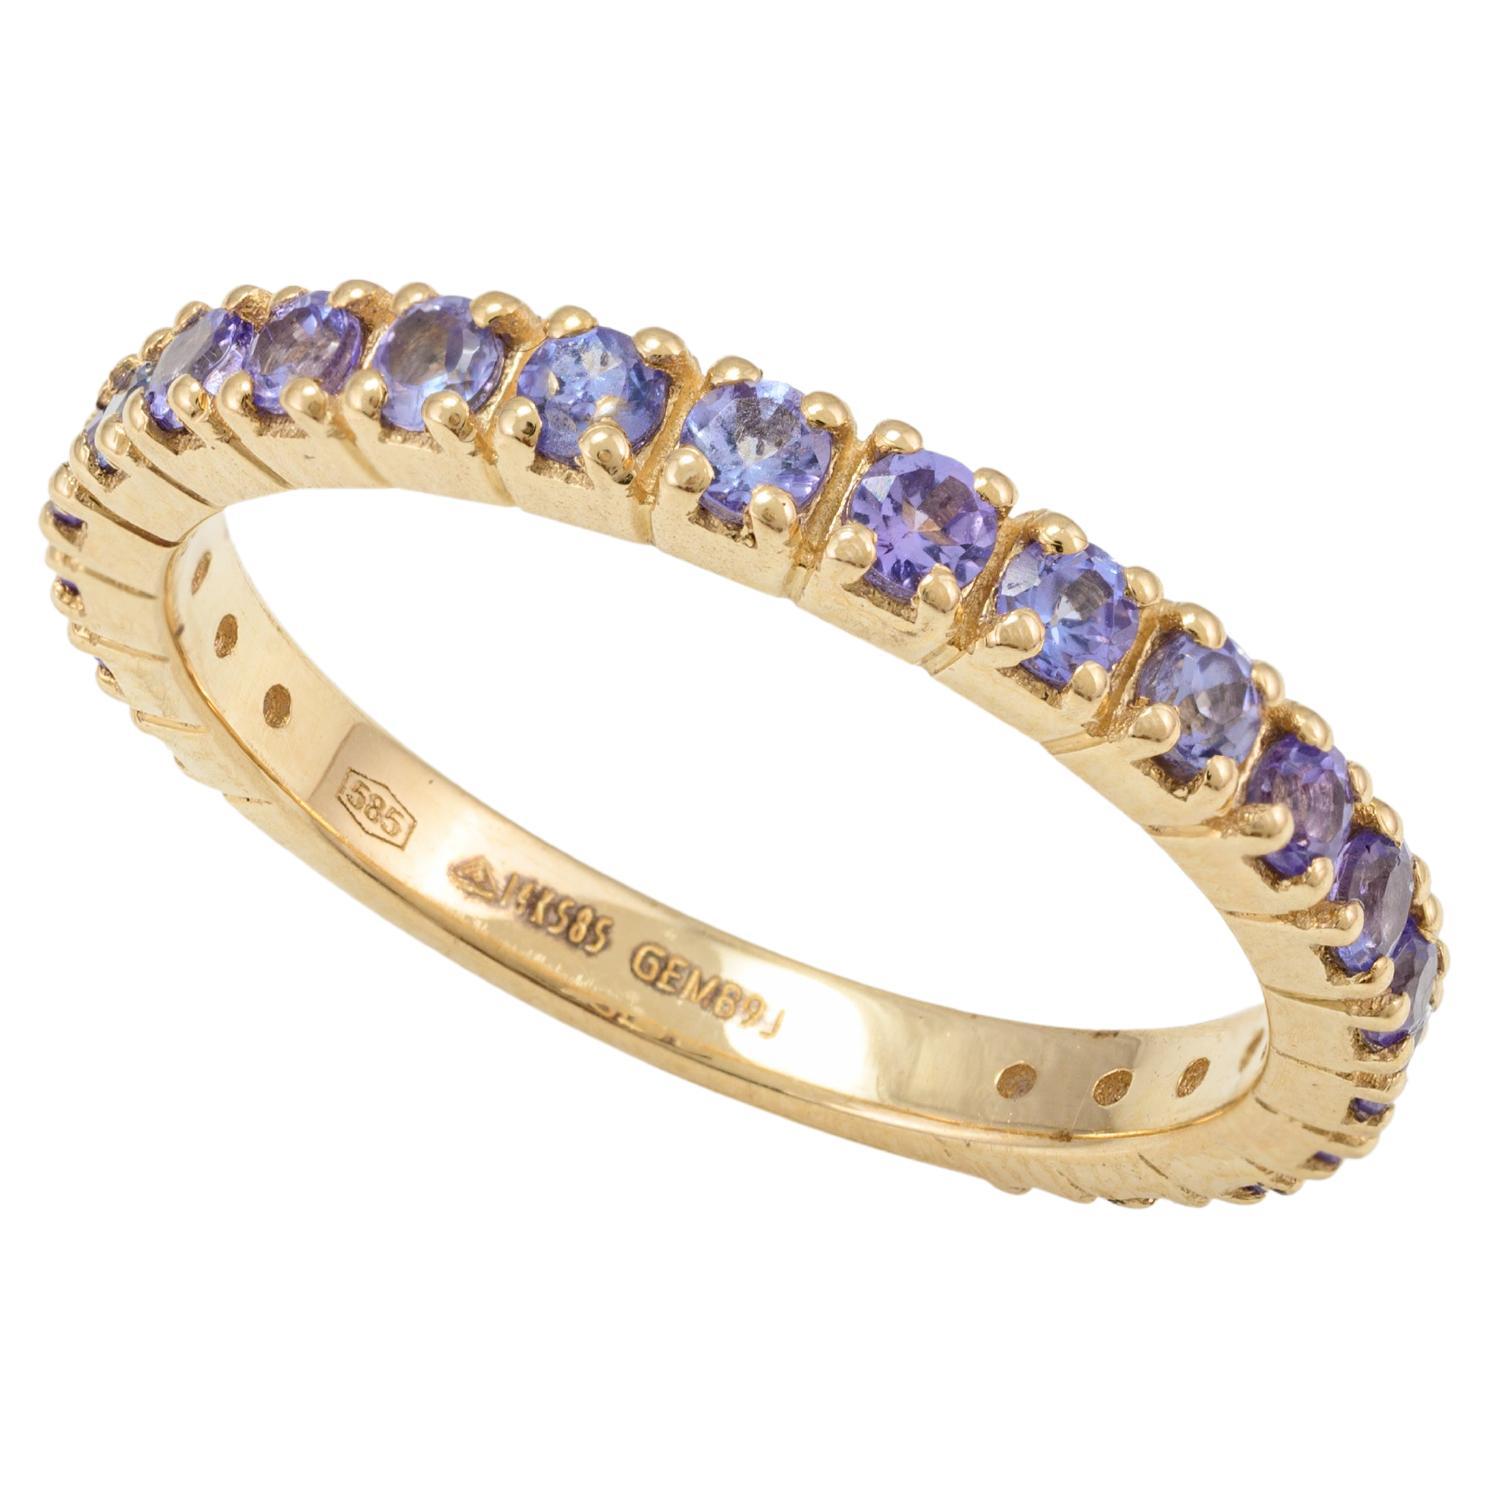 For Sale:  Genuine Round Cut Tanzanite Full Eternity Band Ring 14k Solid Yellow Gold